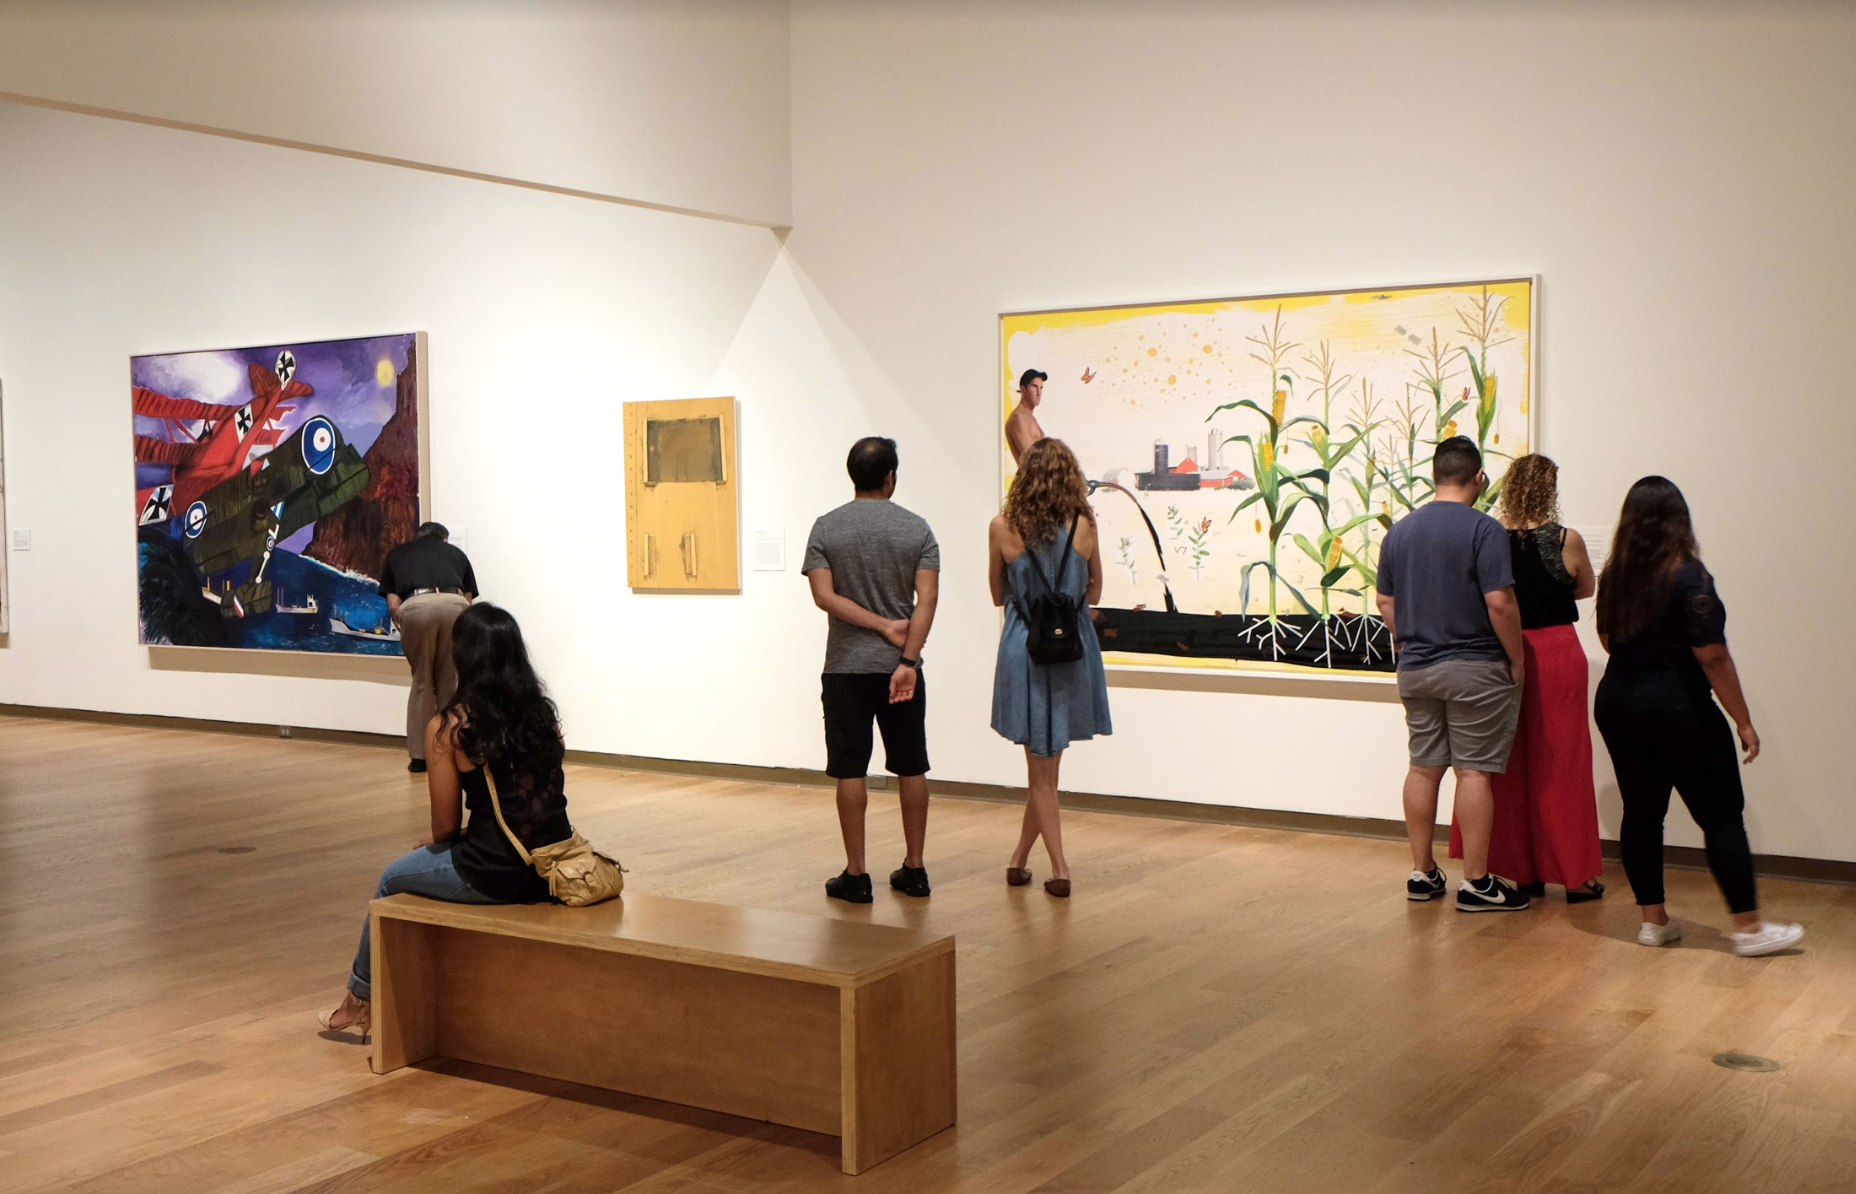 Free entry to Orlando museums: image of gallery at Orlando Museum of Art